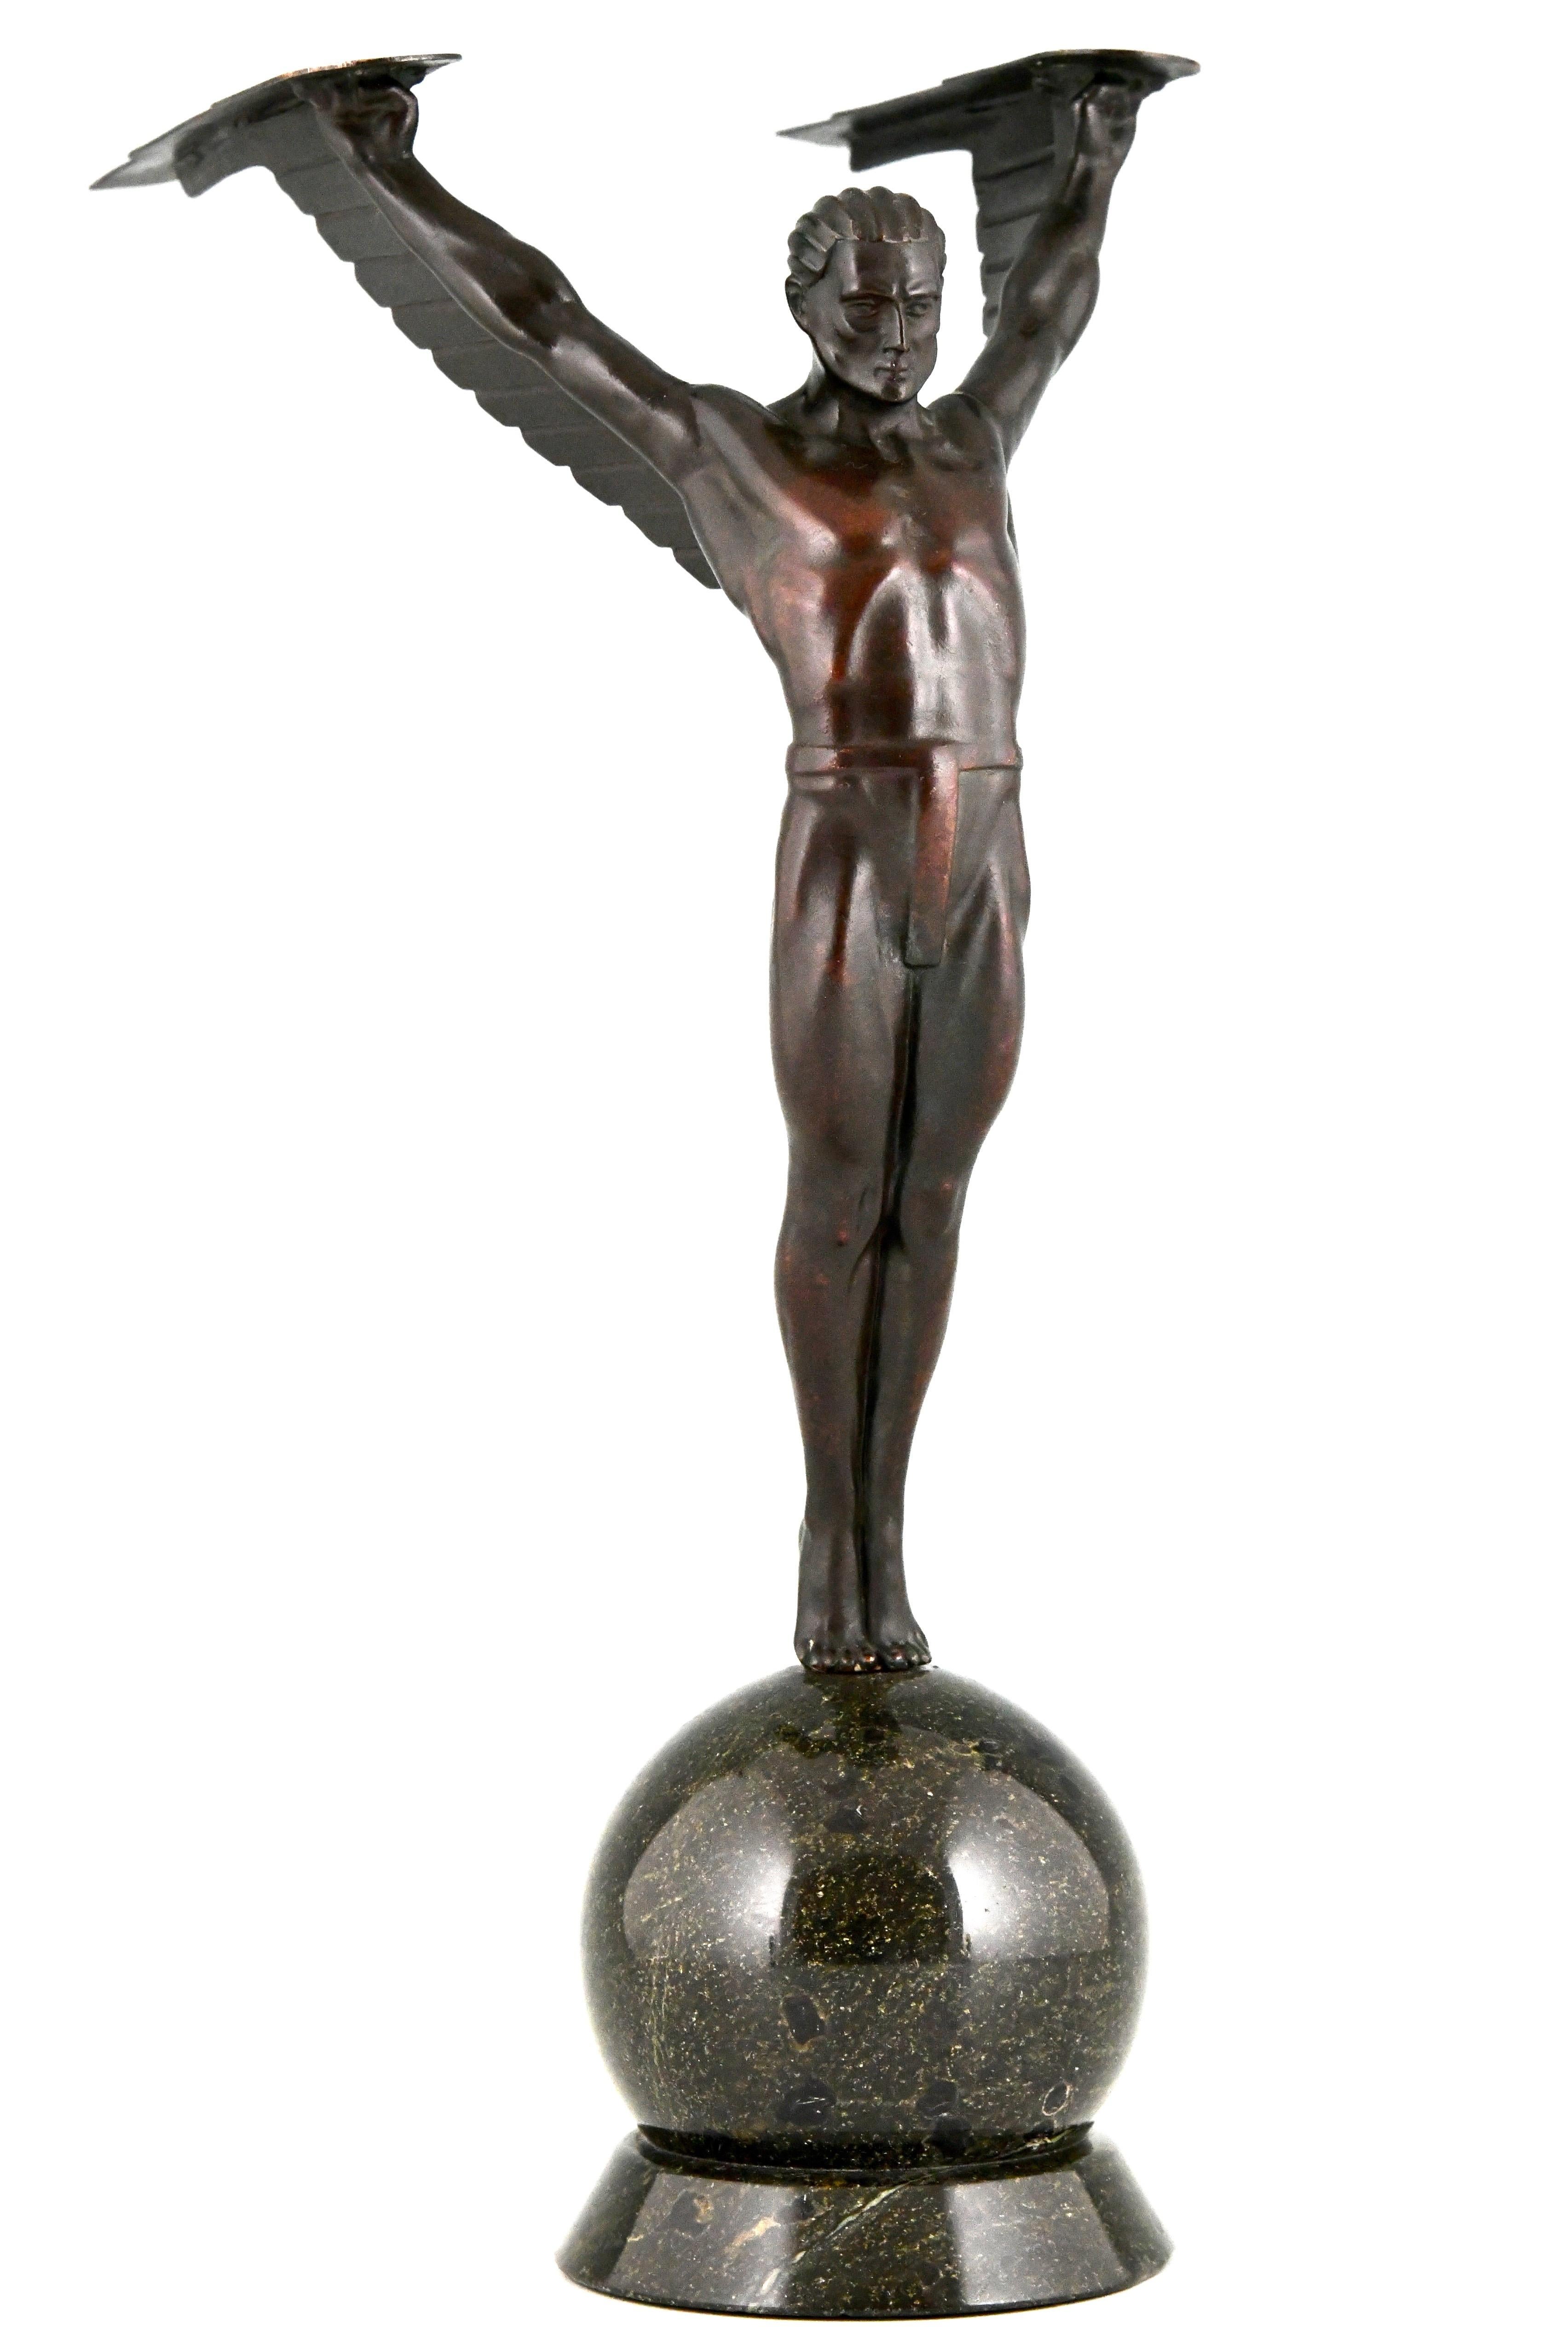 Metal Icarus Art Deco Sculpture of a Winged Athlete in the Style of Schmidt Hofer